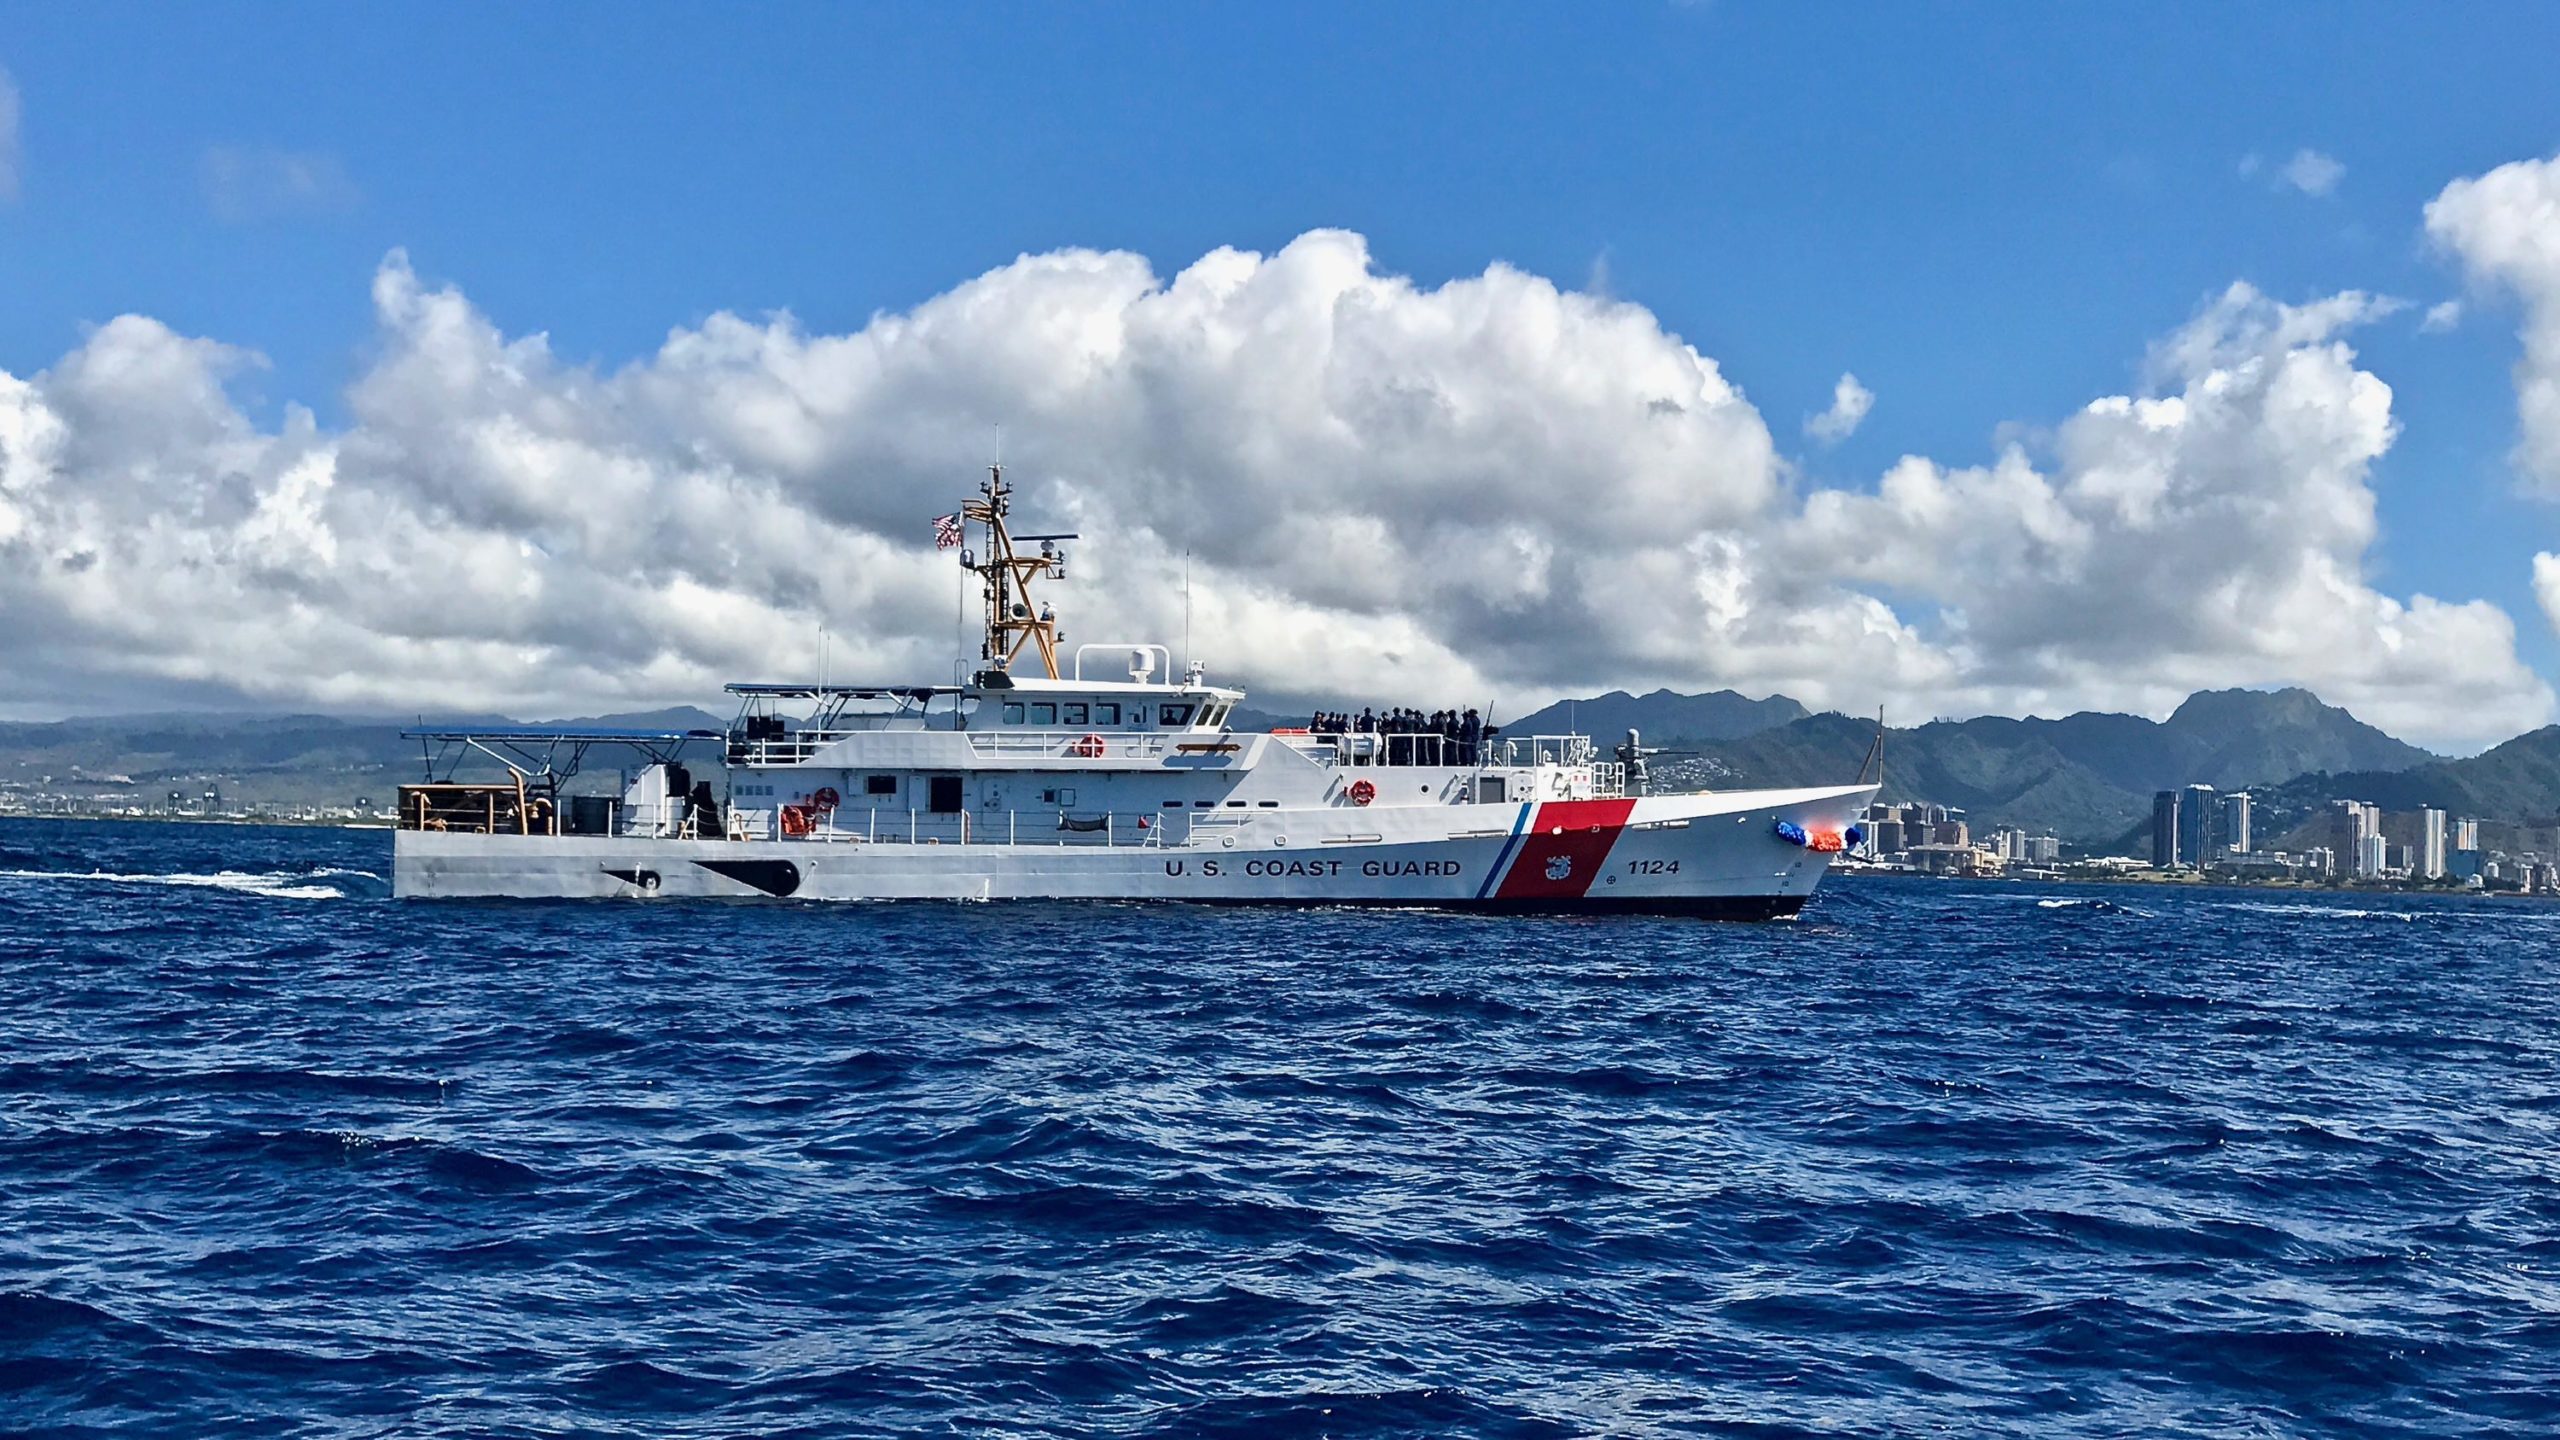 USCGC Oliver Berry sailing near clouds